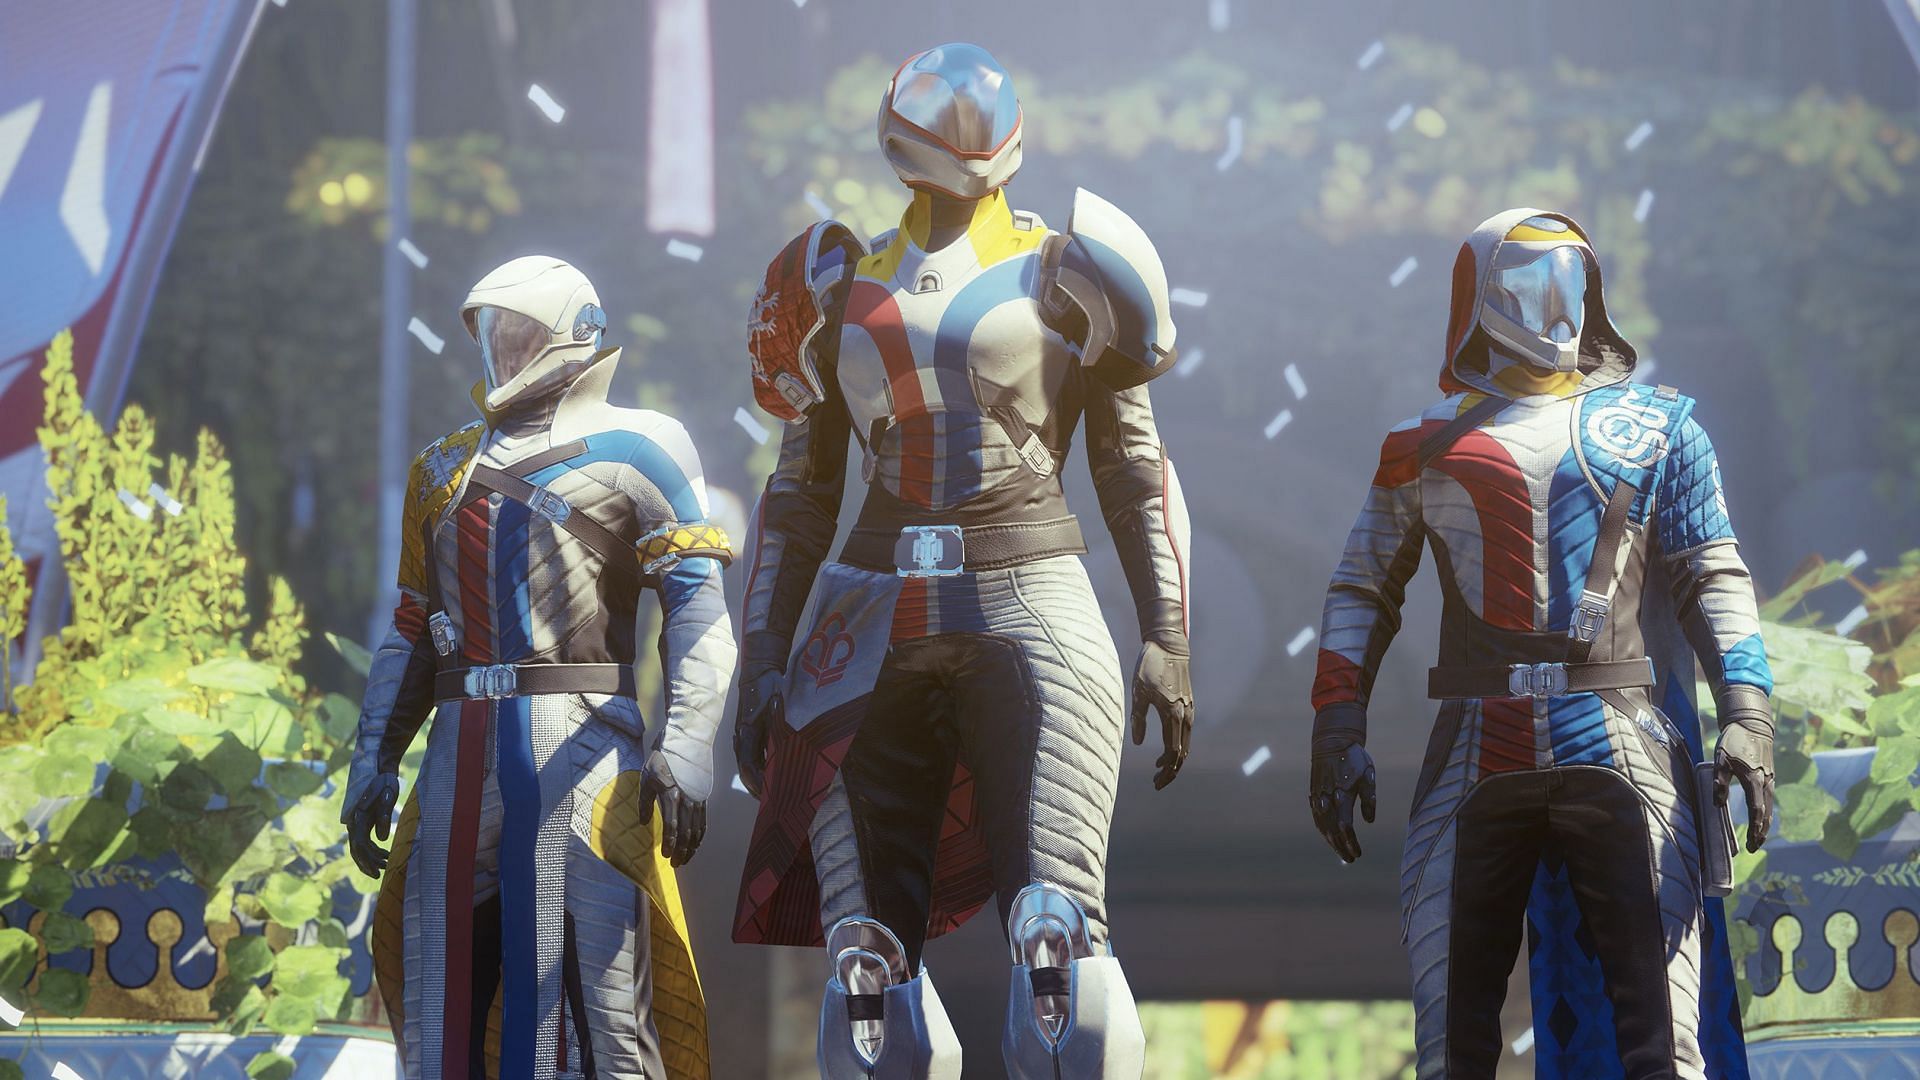 A screenshot from the announcement for the Guardian Games event (Image via Bungie Inc.)